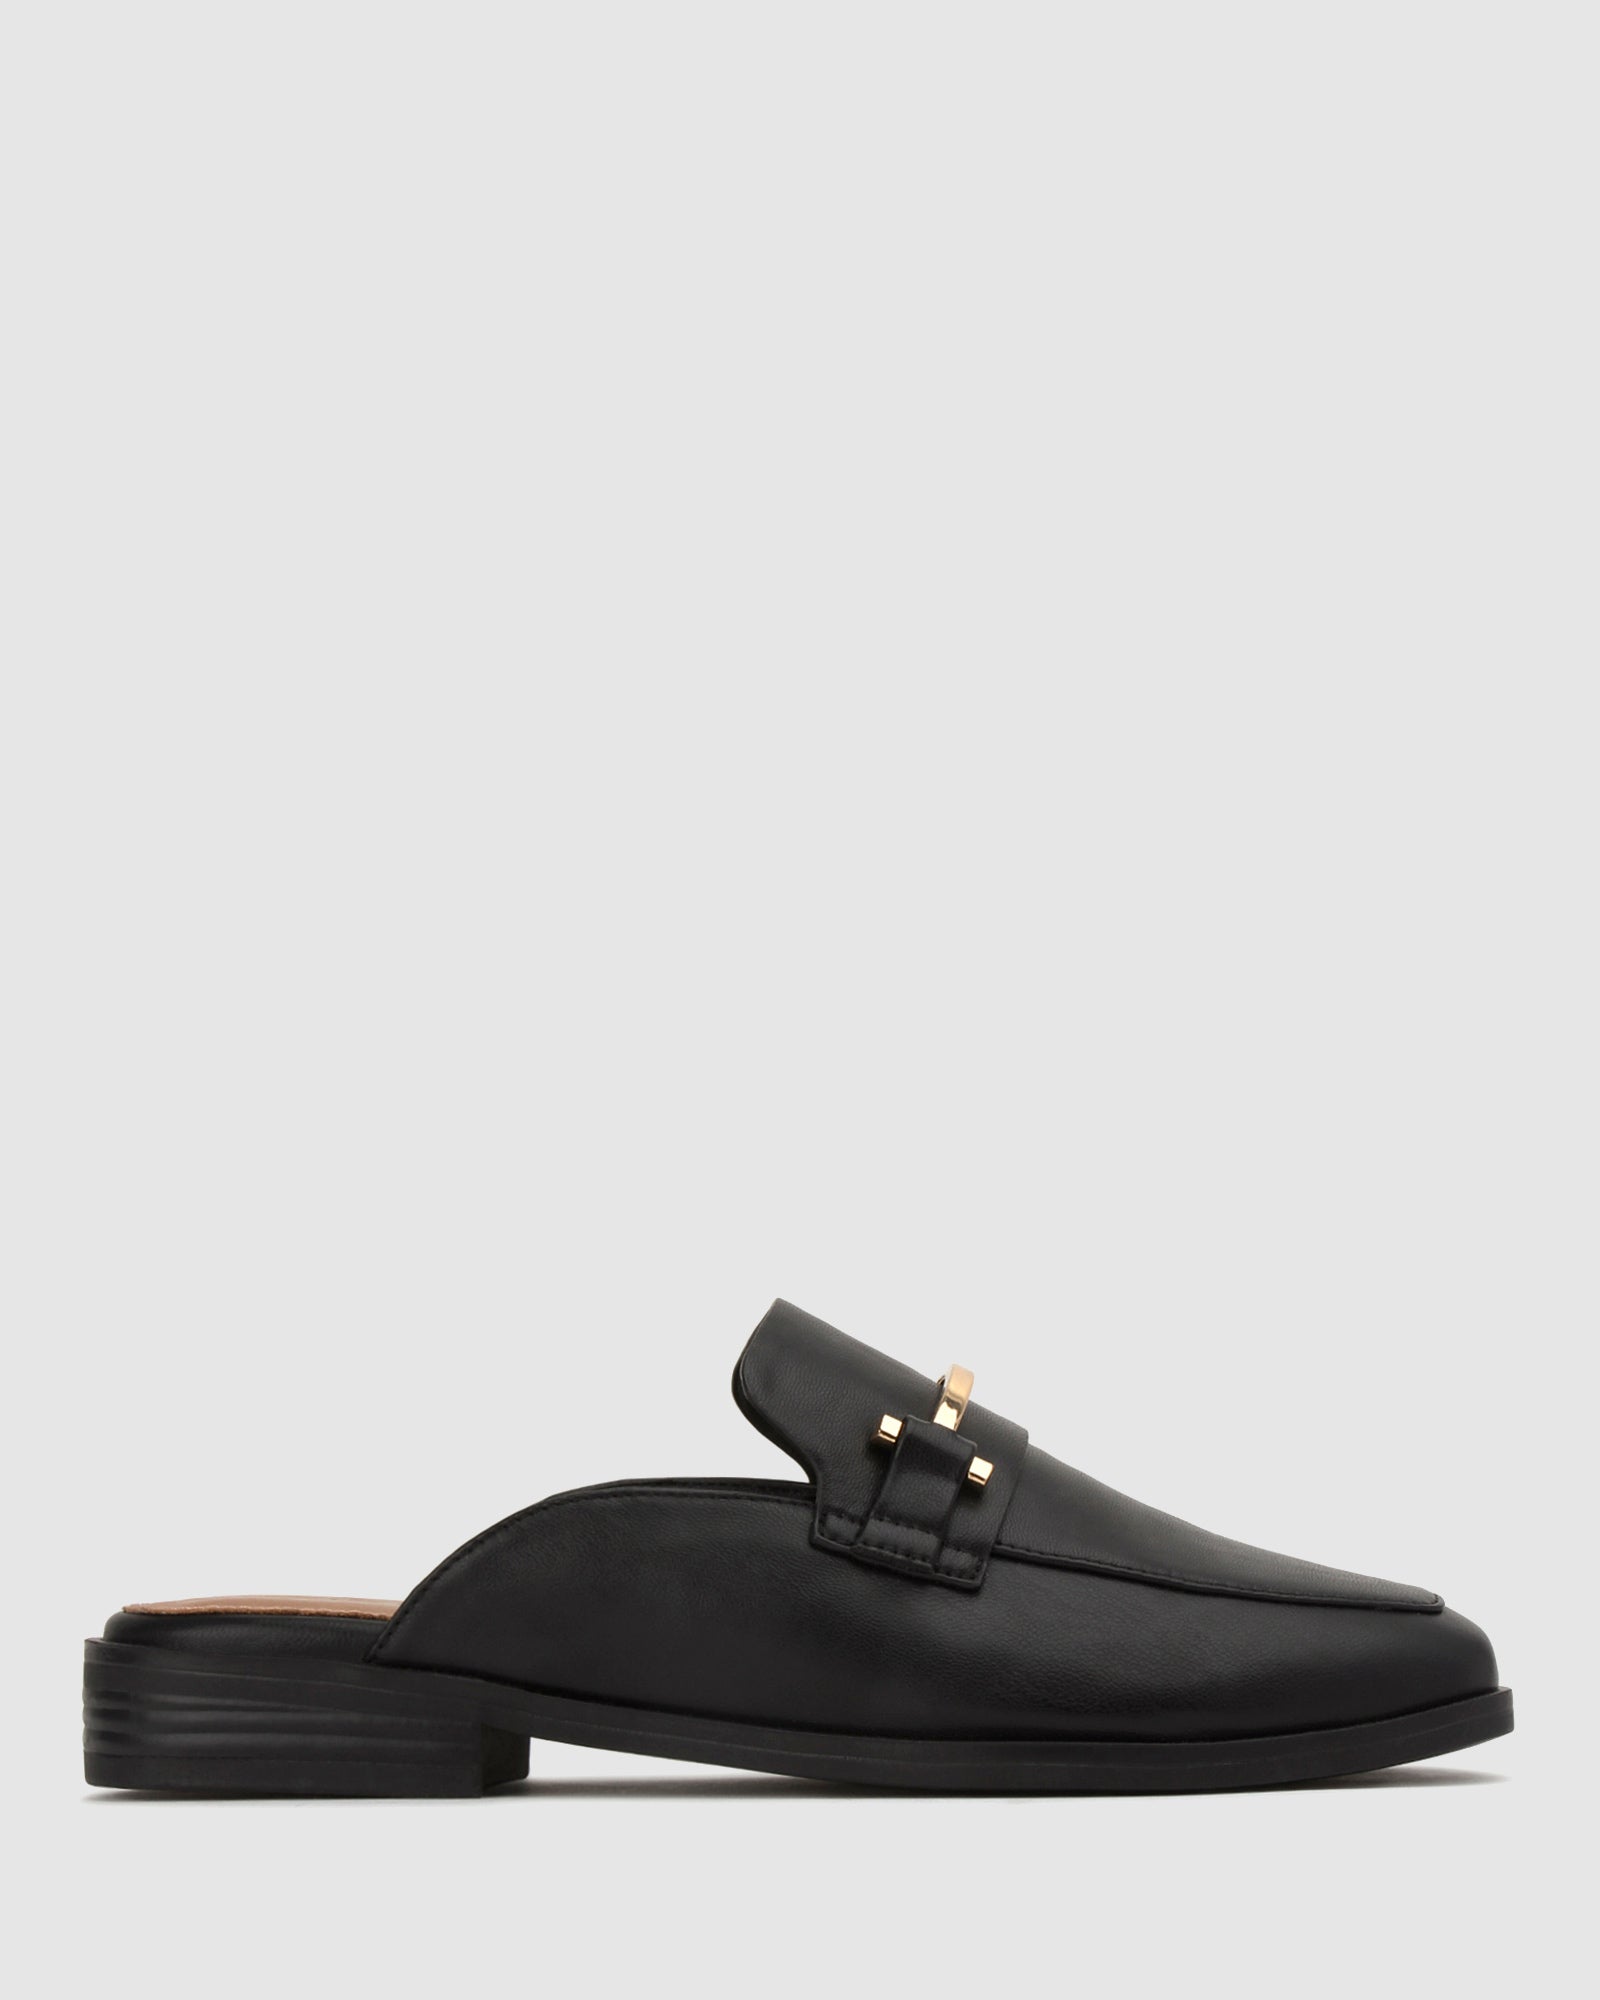 Buy BECCI Square Toe Loafers by Zeroe online - Betts